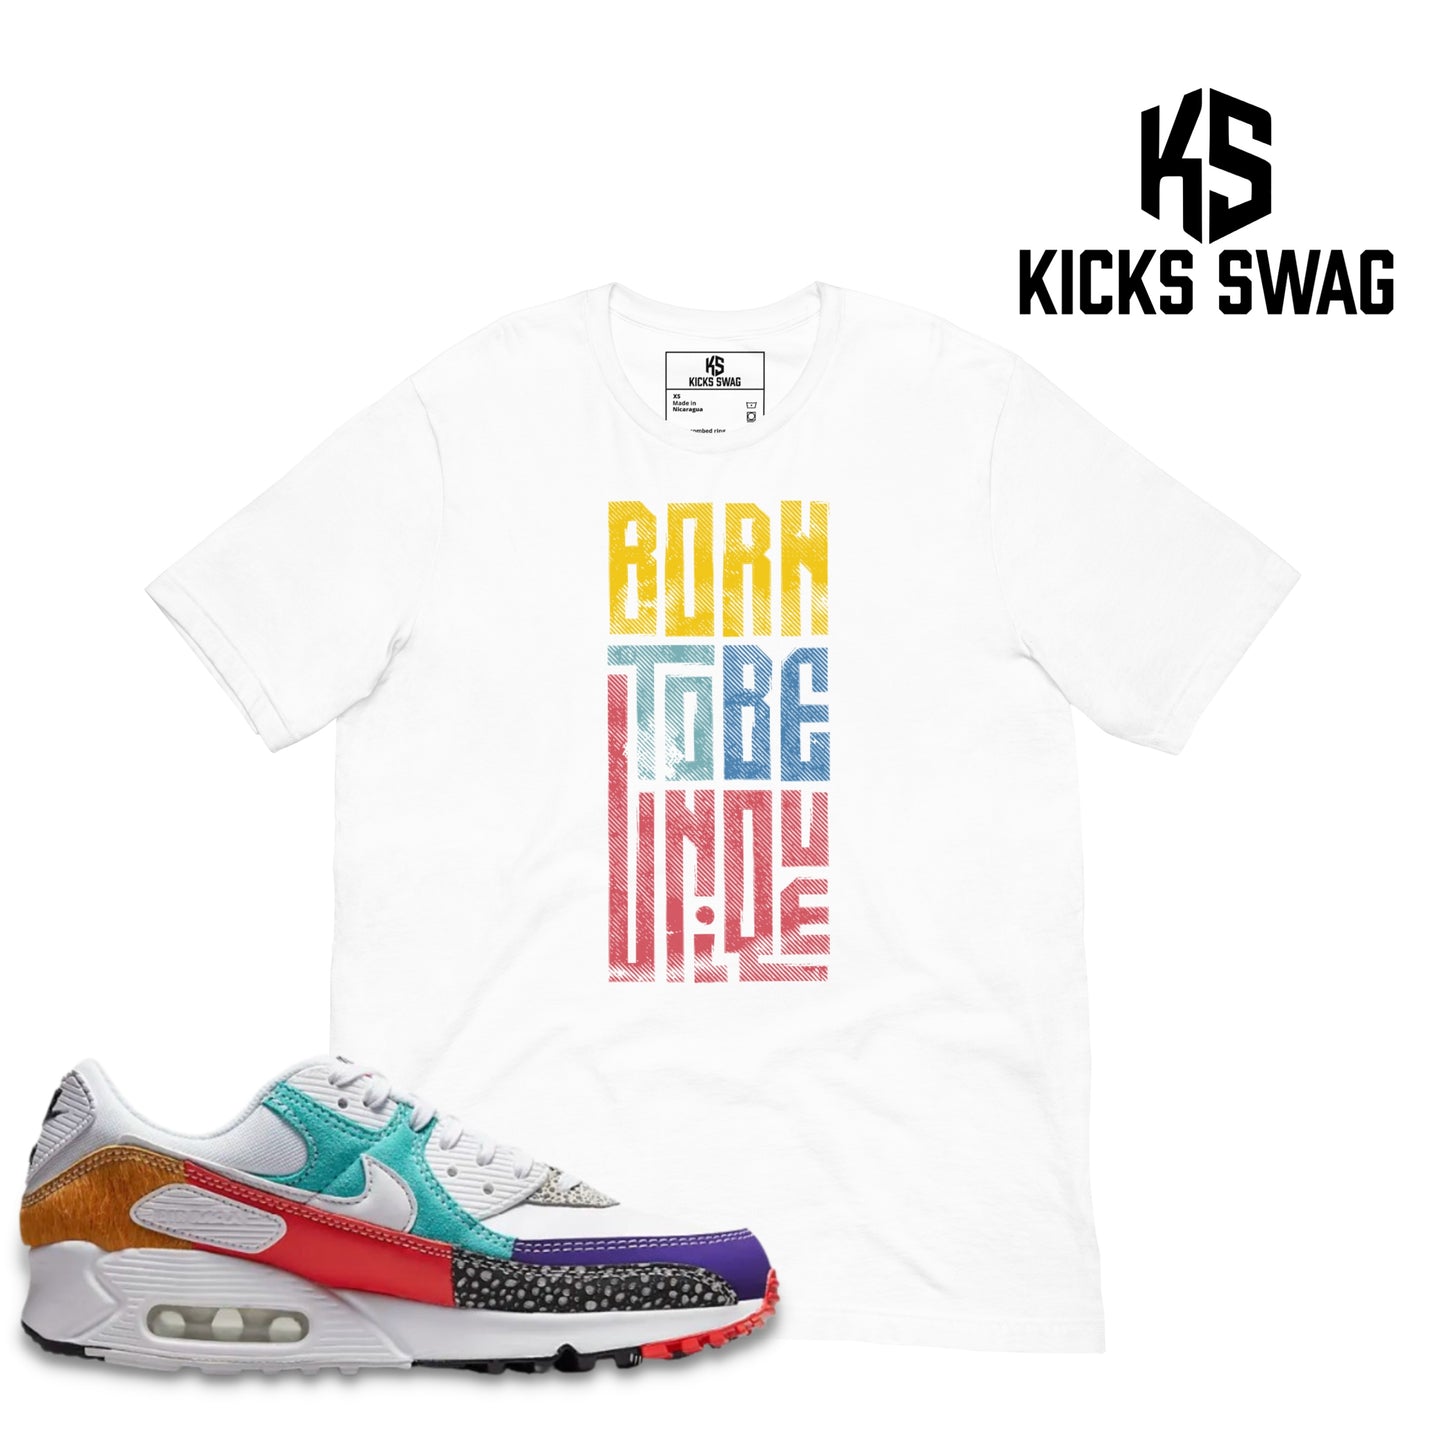 T-shirt - Nike Air Max 90 SE (Born to be unique)